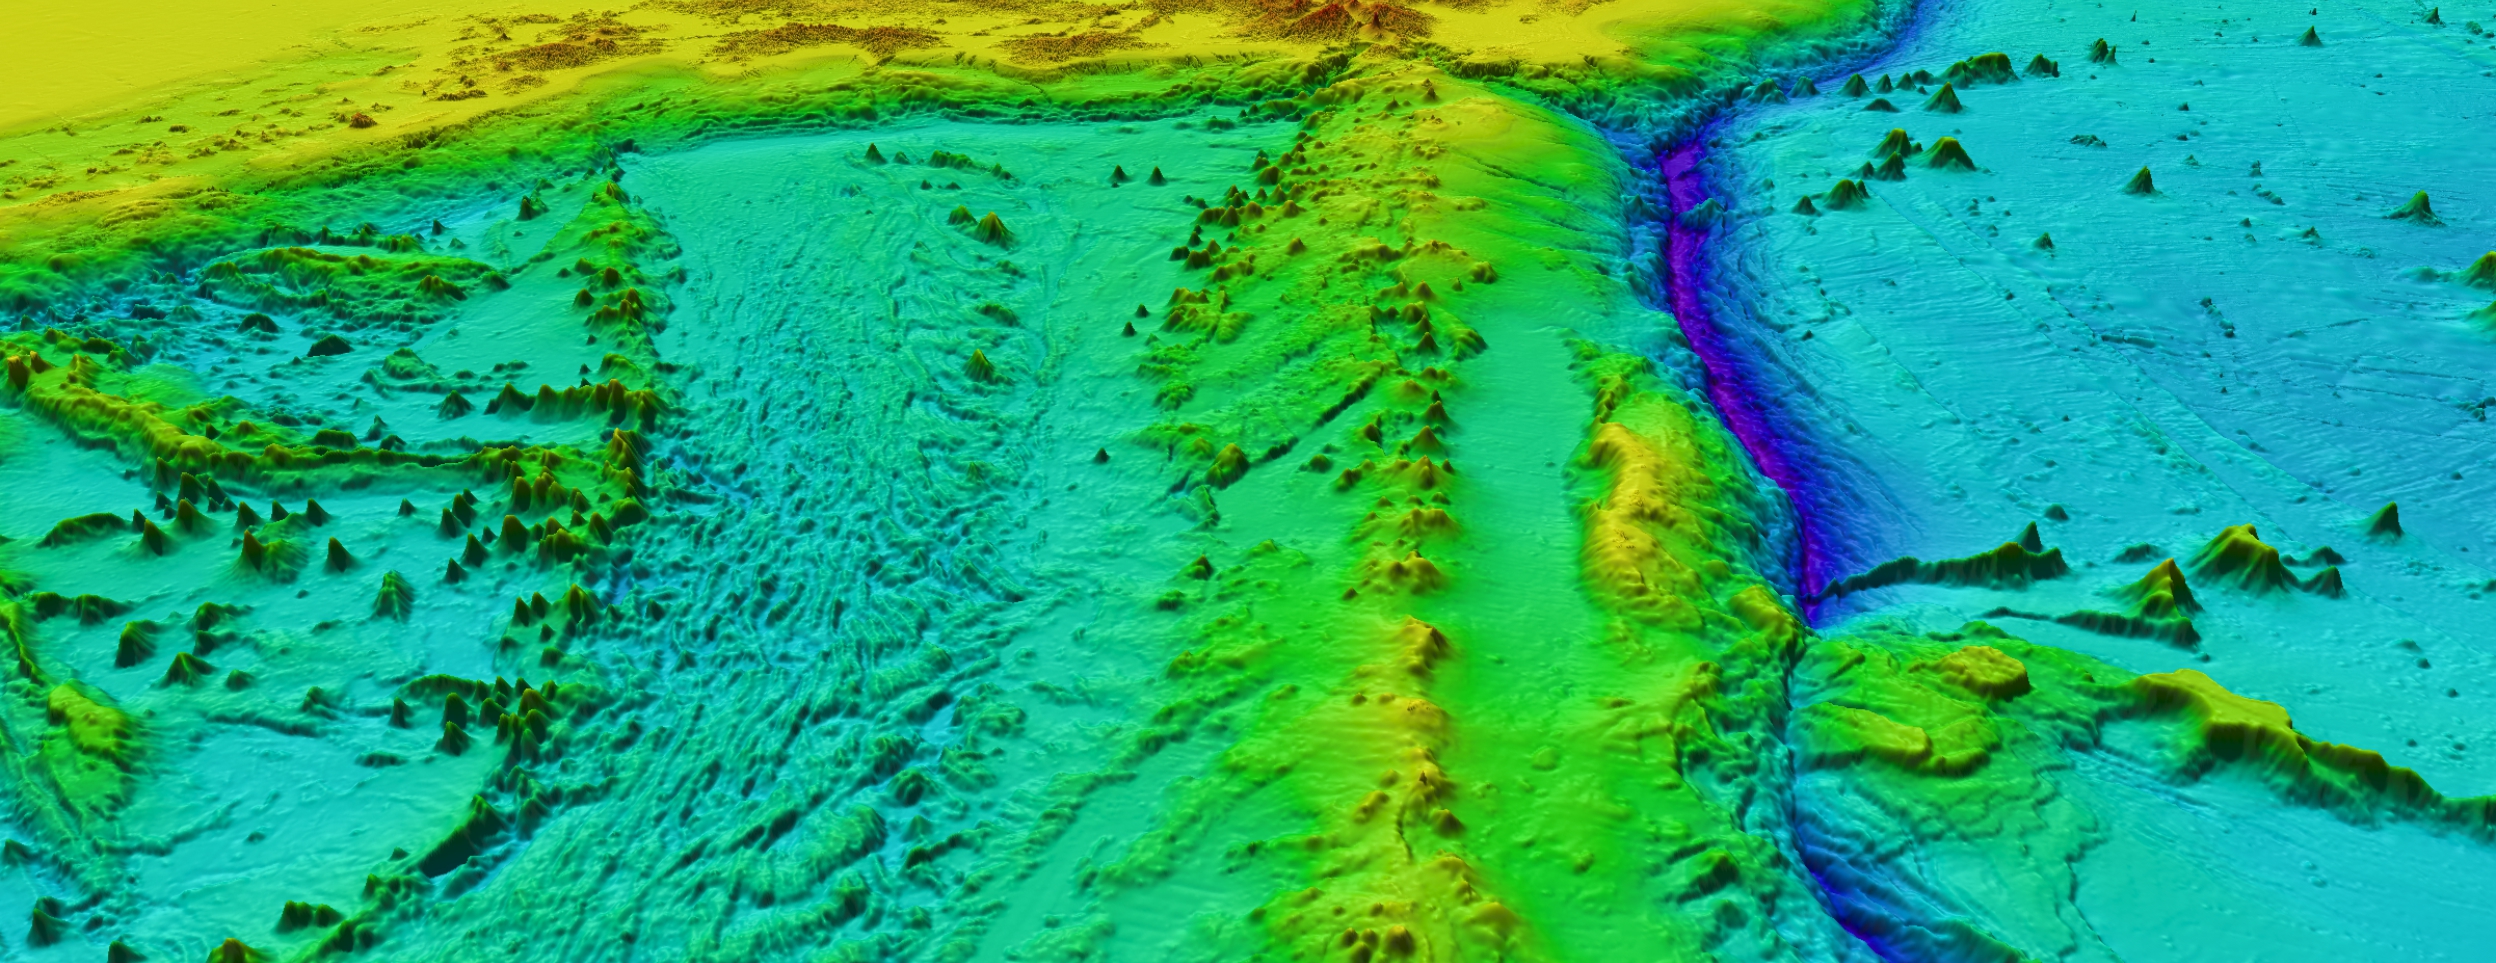 Bathymetry for part of the Pacific Ocean from the GEBCO global grid